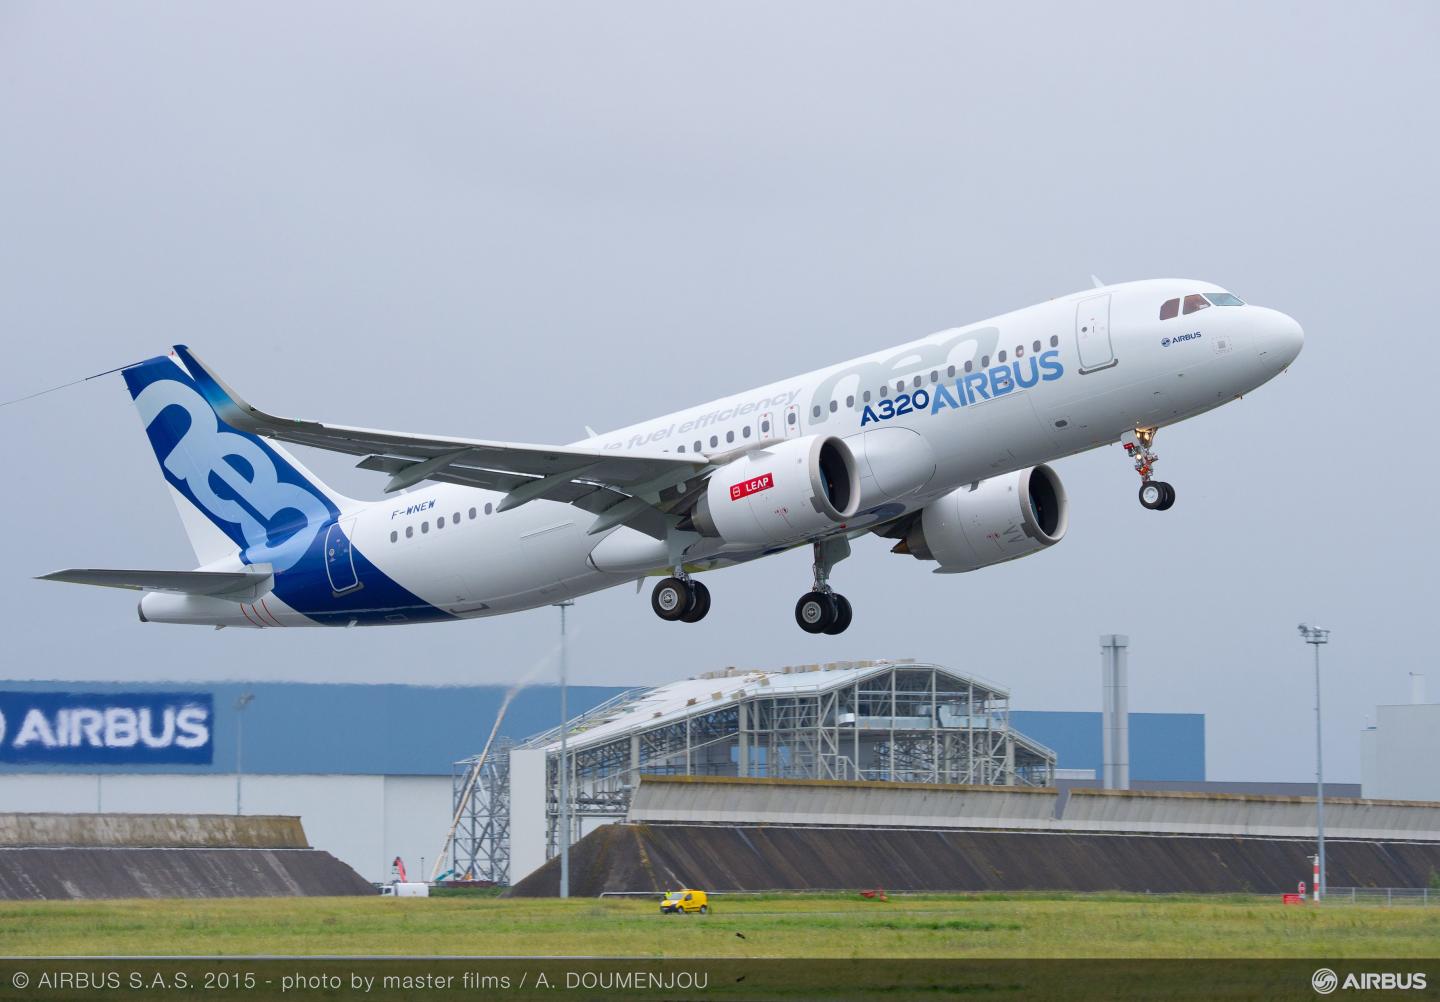 Airbus expects it will deliver about 800 commercial aircraft in 2024